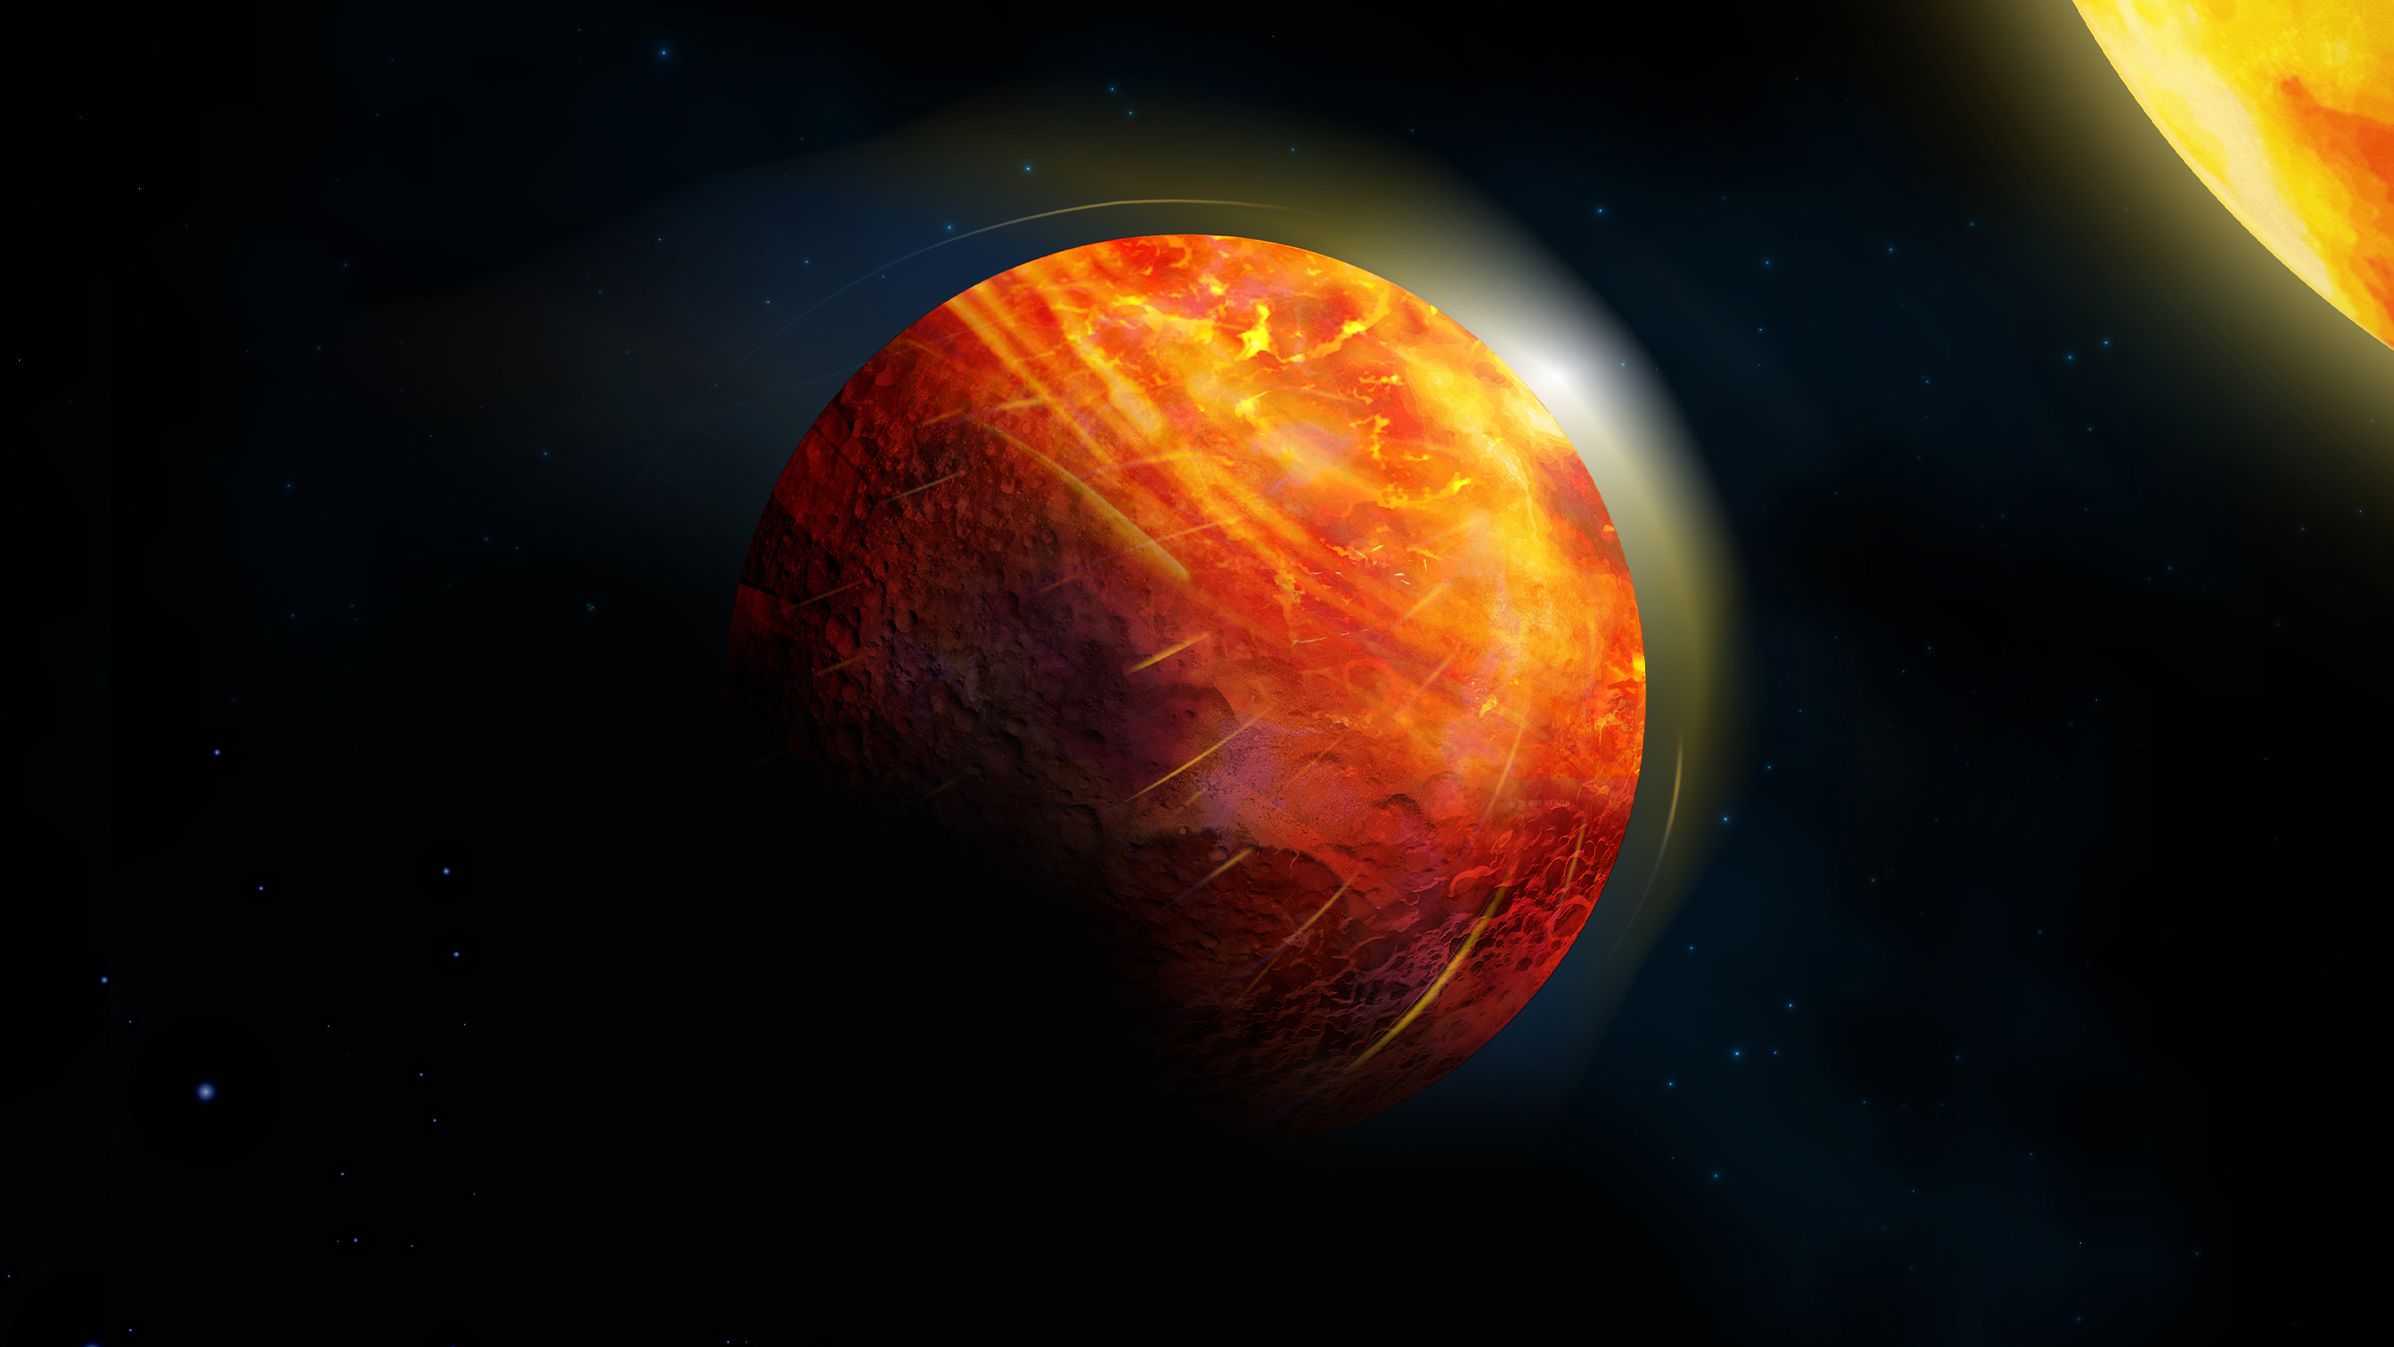 An artist's impression of the lava planet K2-141b: At the center of the large illuminated region, there is an ocean of molten rock overlain by an atmosphere of rock vapor.